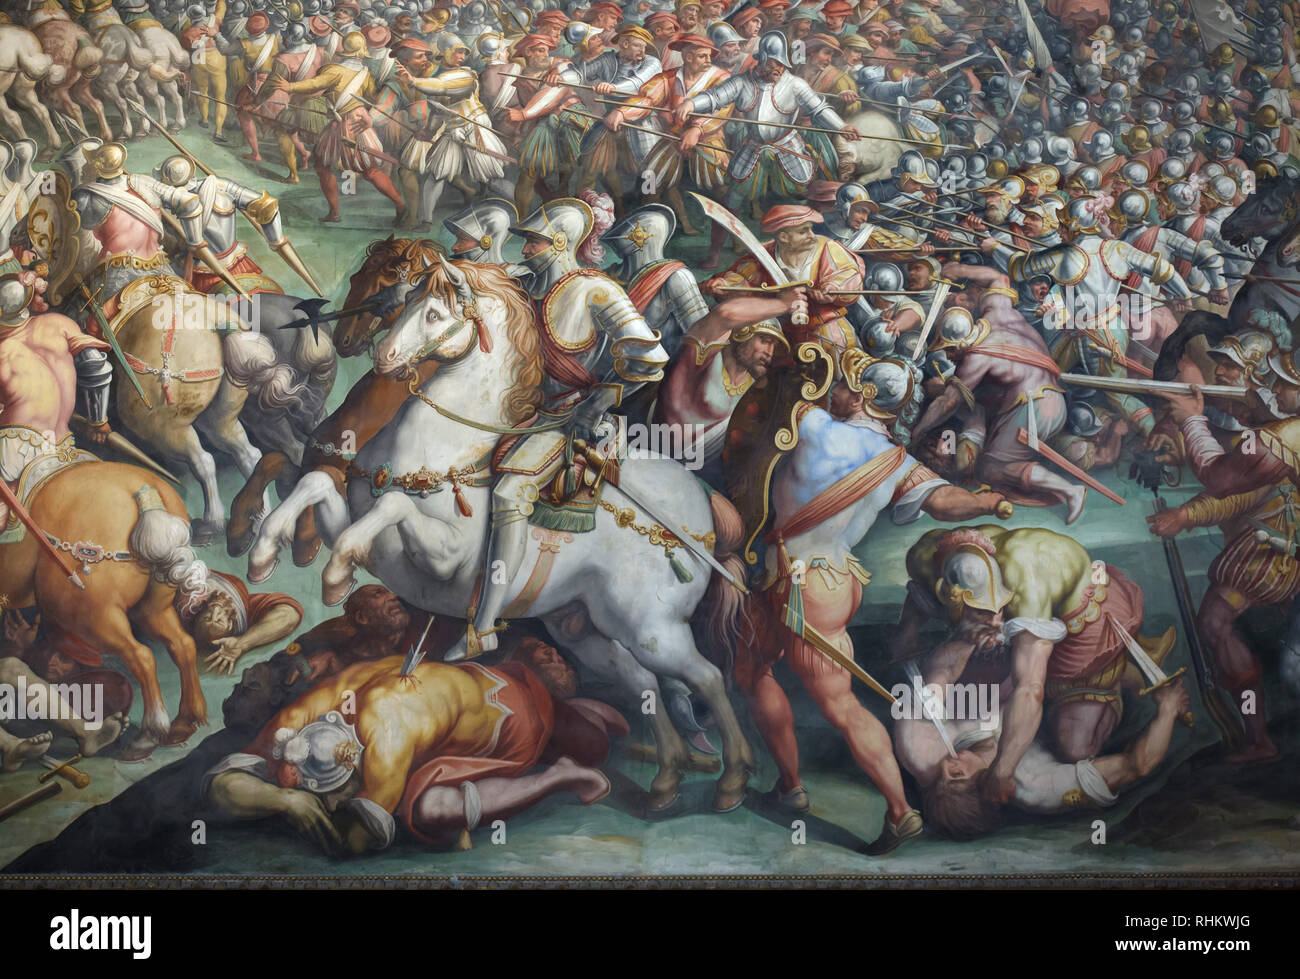 Battle of Marciano on 2 August 1554 depicted in the fresco by Italian Mannerist painter Giorgio Vasari and his assistants Giovanni Battista Naldini and Jacopo Zucchi (1570-1571) in the Hall of the Five Hundred (Salone dei Cinquecento) in the Palazzo Vecchio in Florence, Tuscany, Italy. Stock Photo